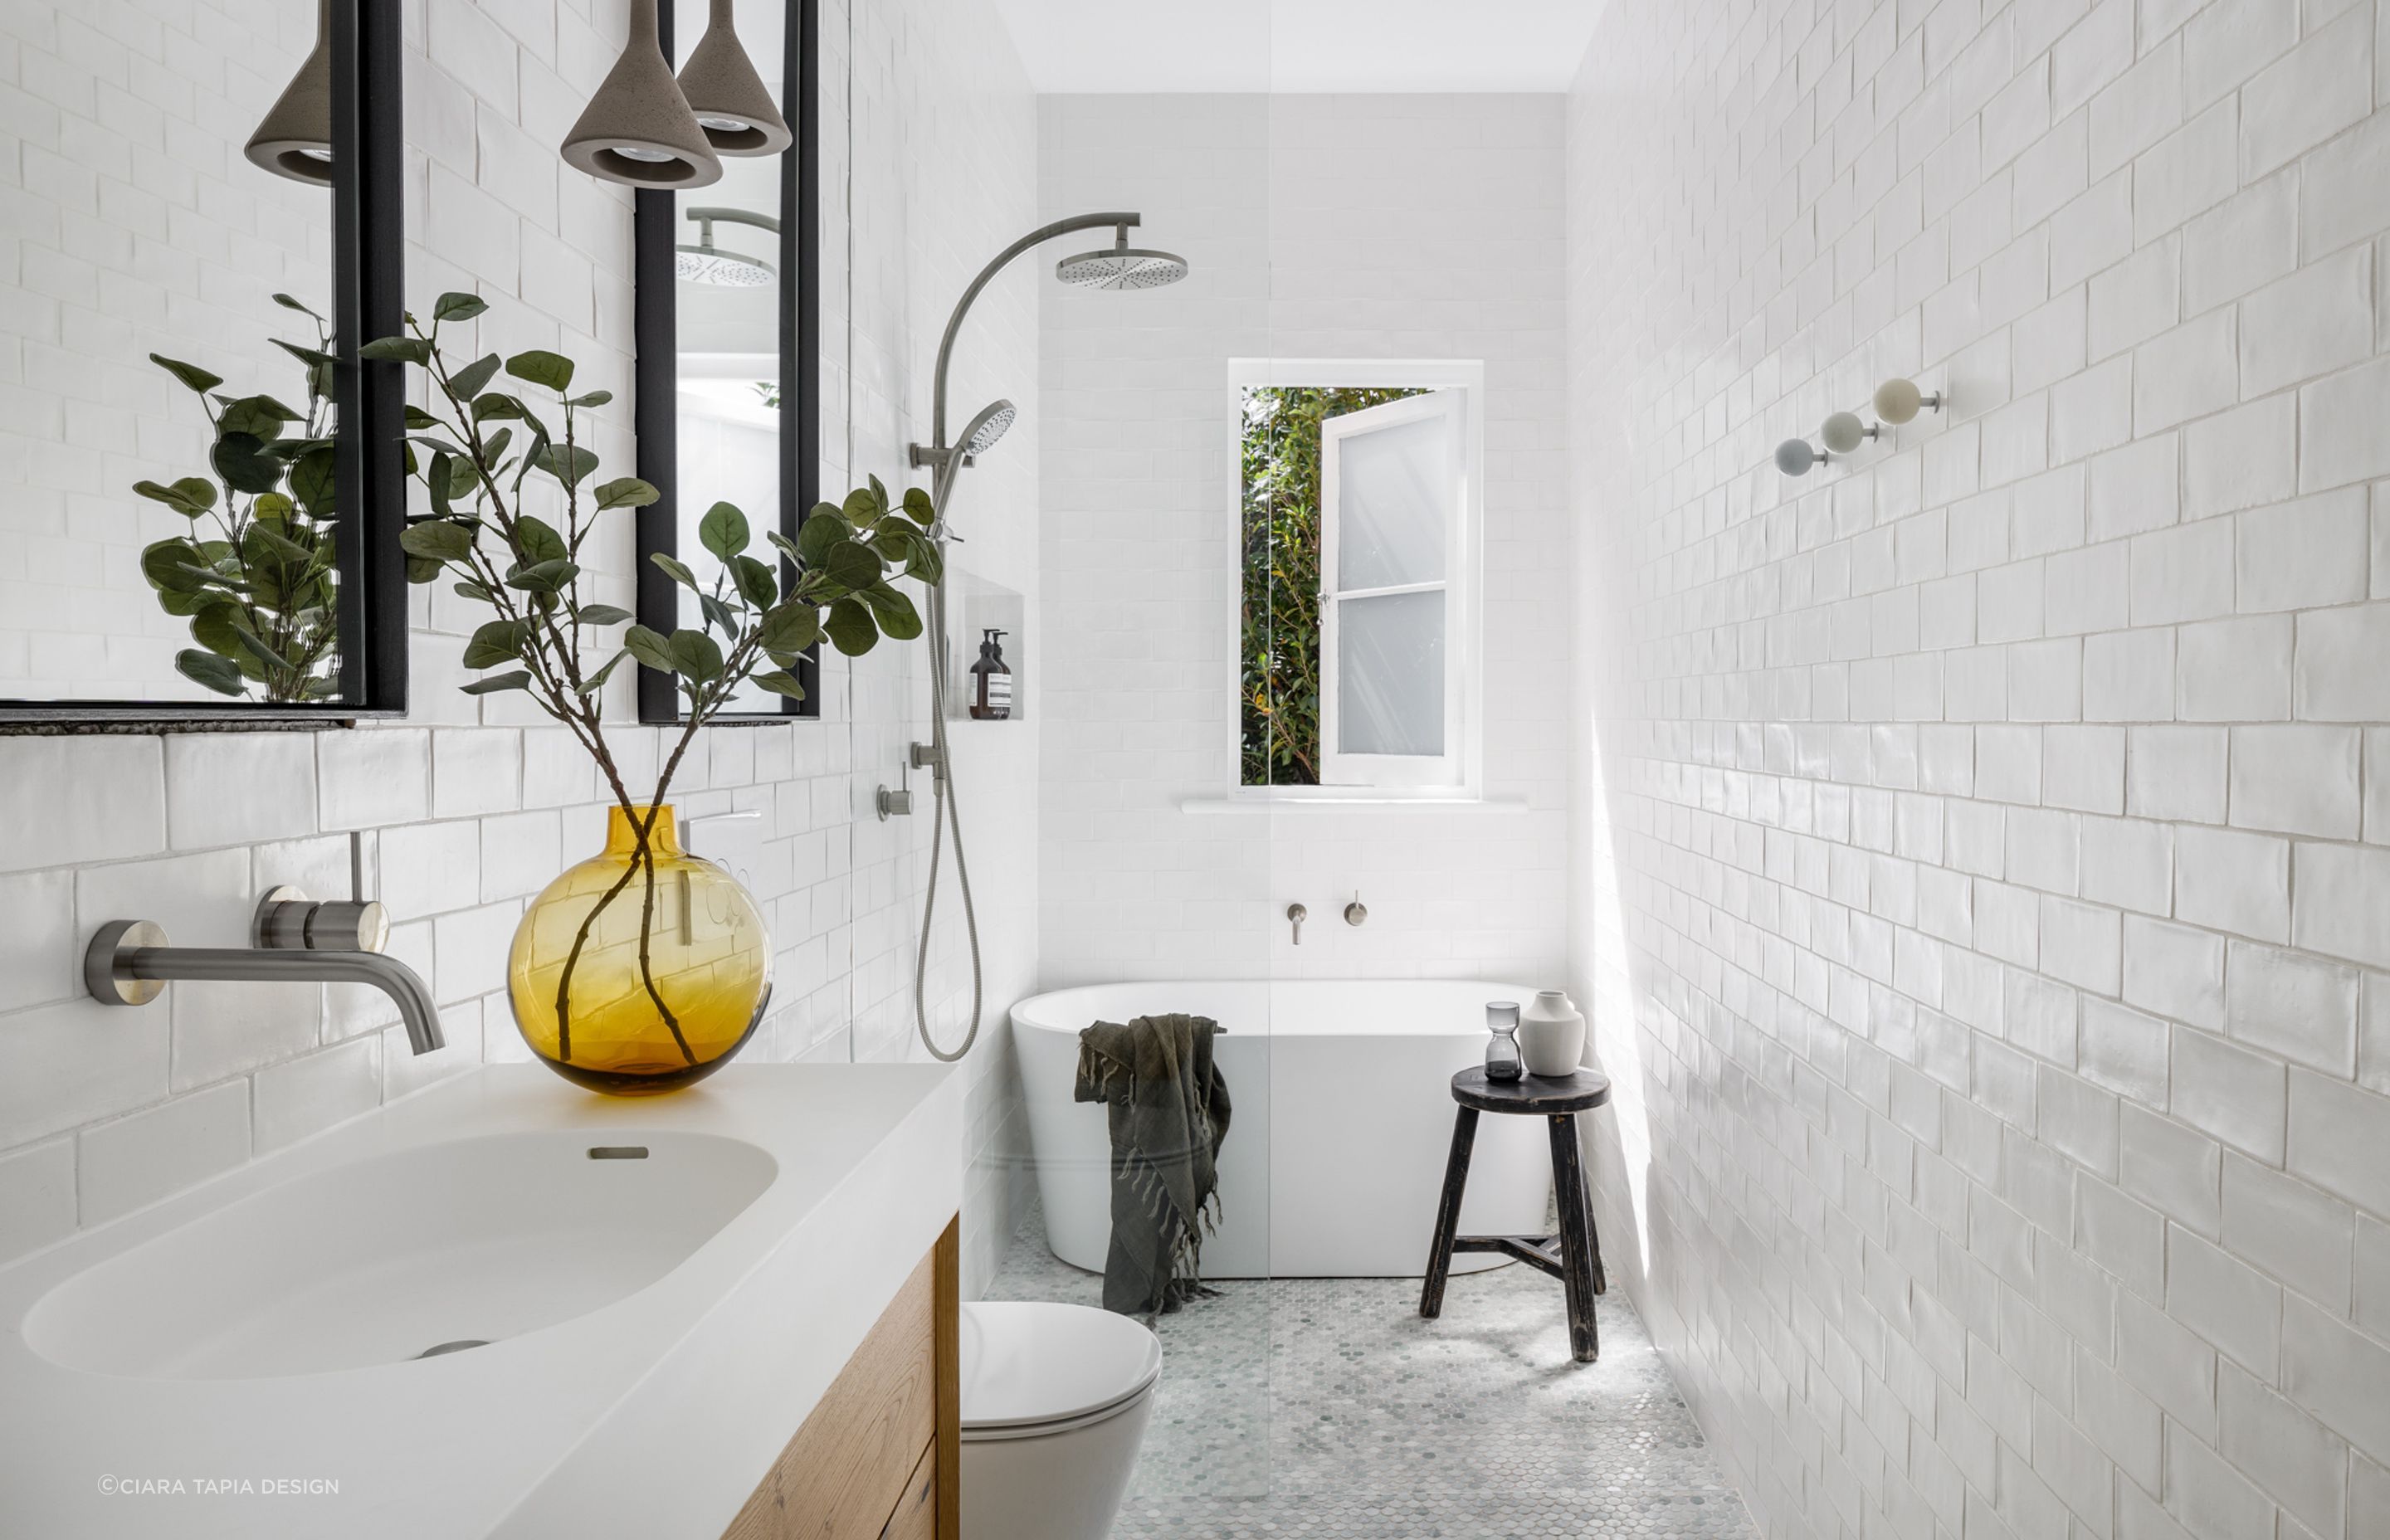 There's no shortage of bathroom decor ideas to explore and inspire you